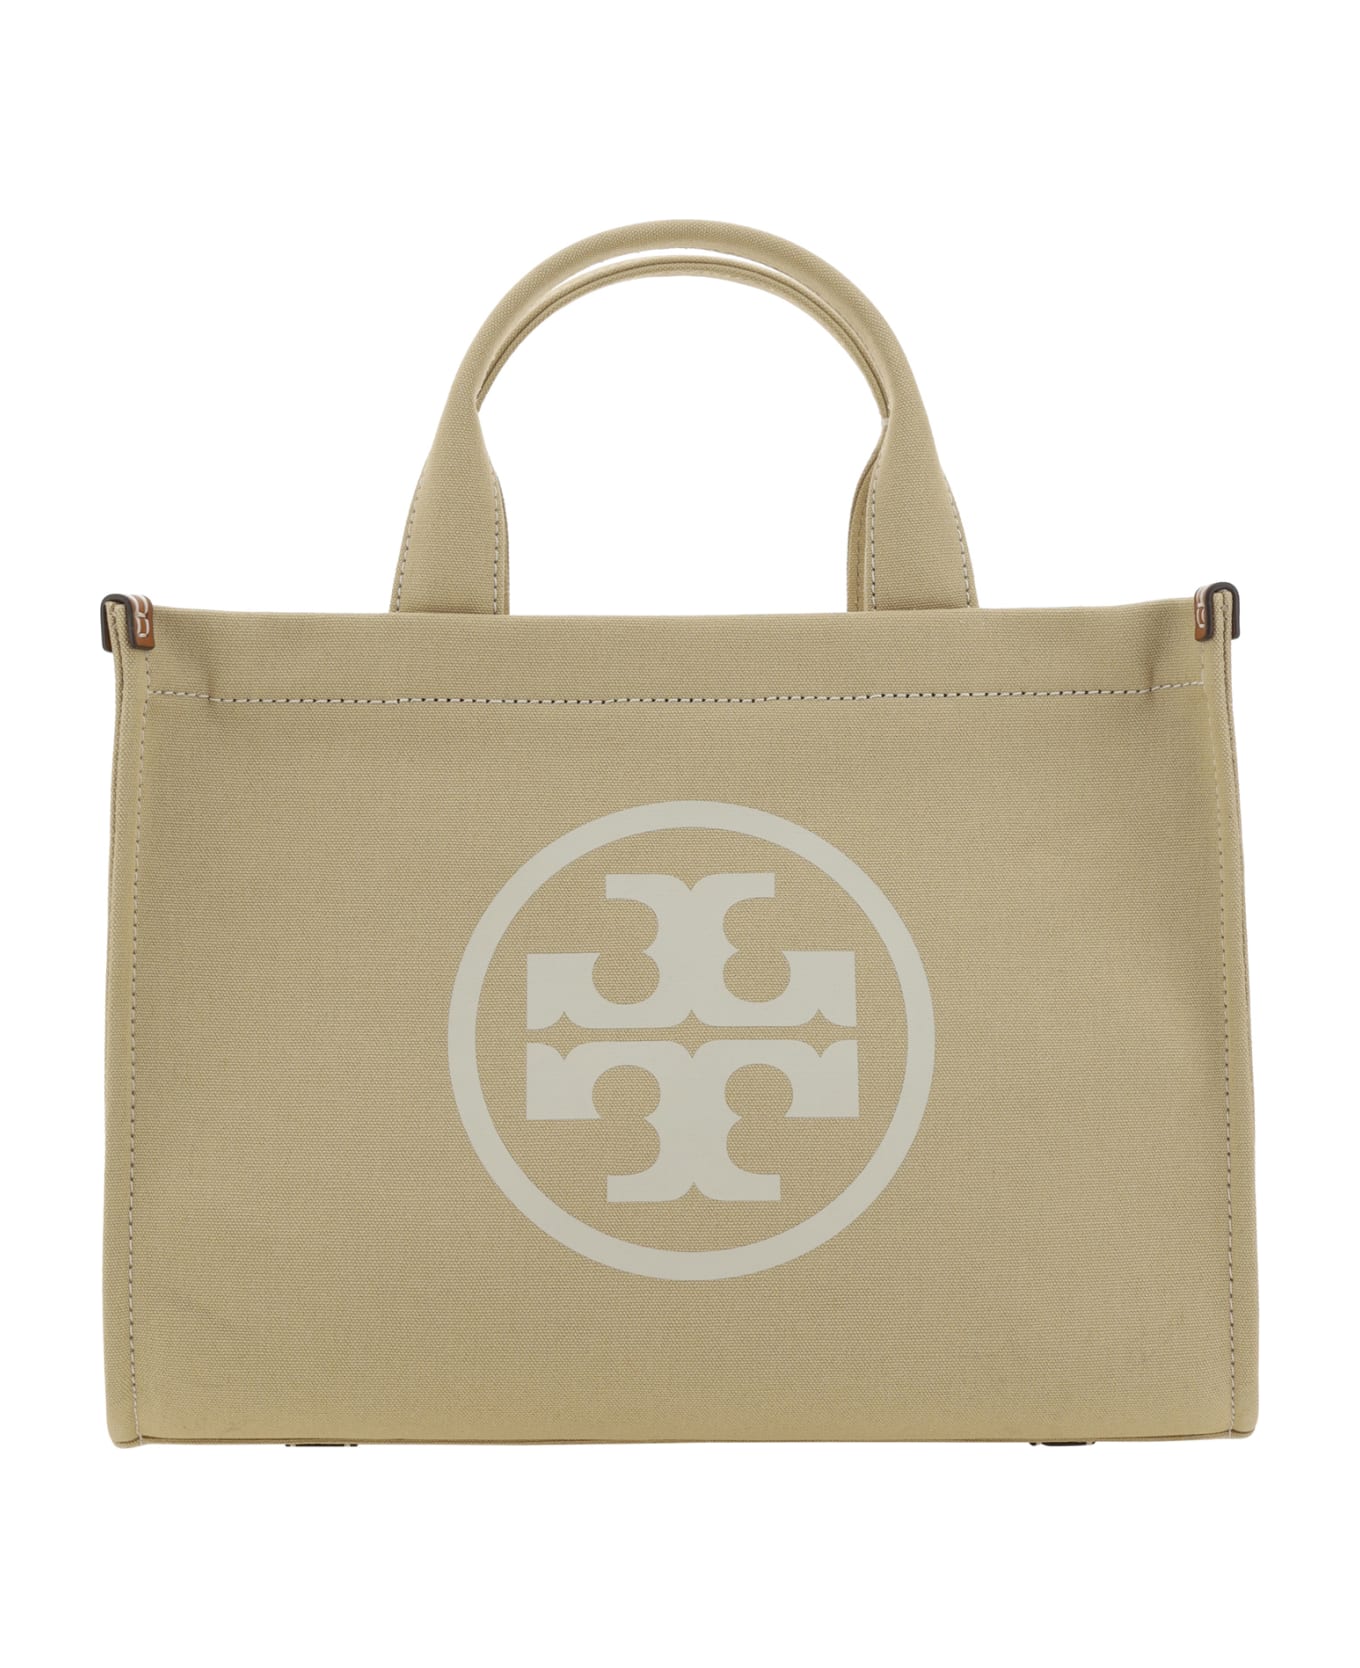 Tory Burch Tote - Hickory